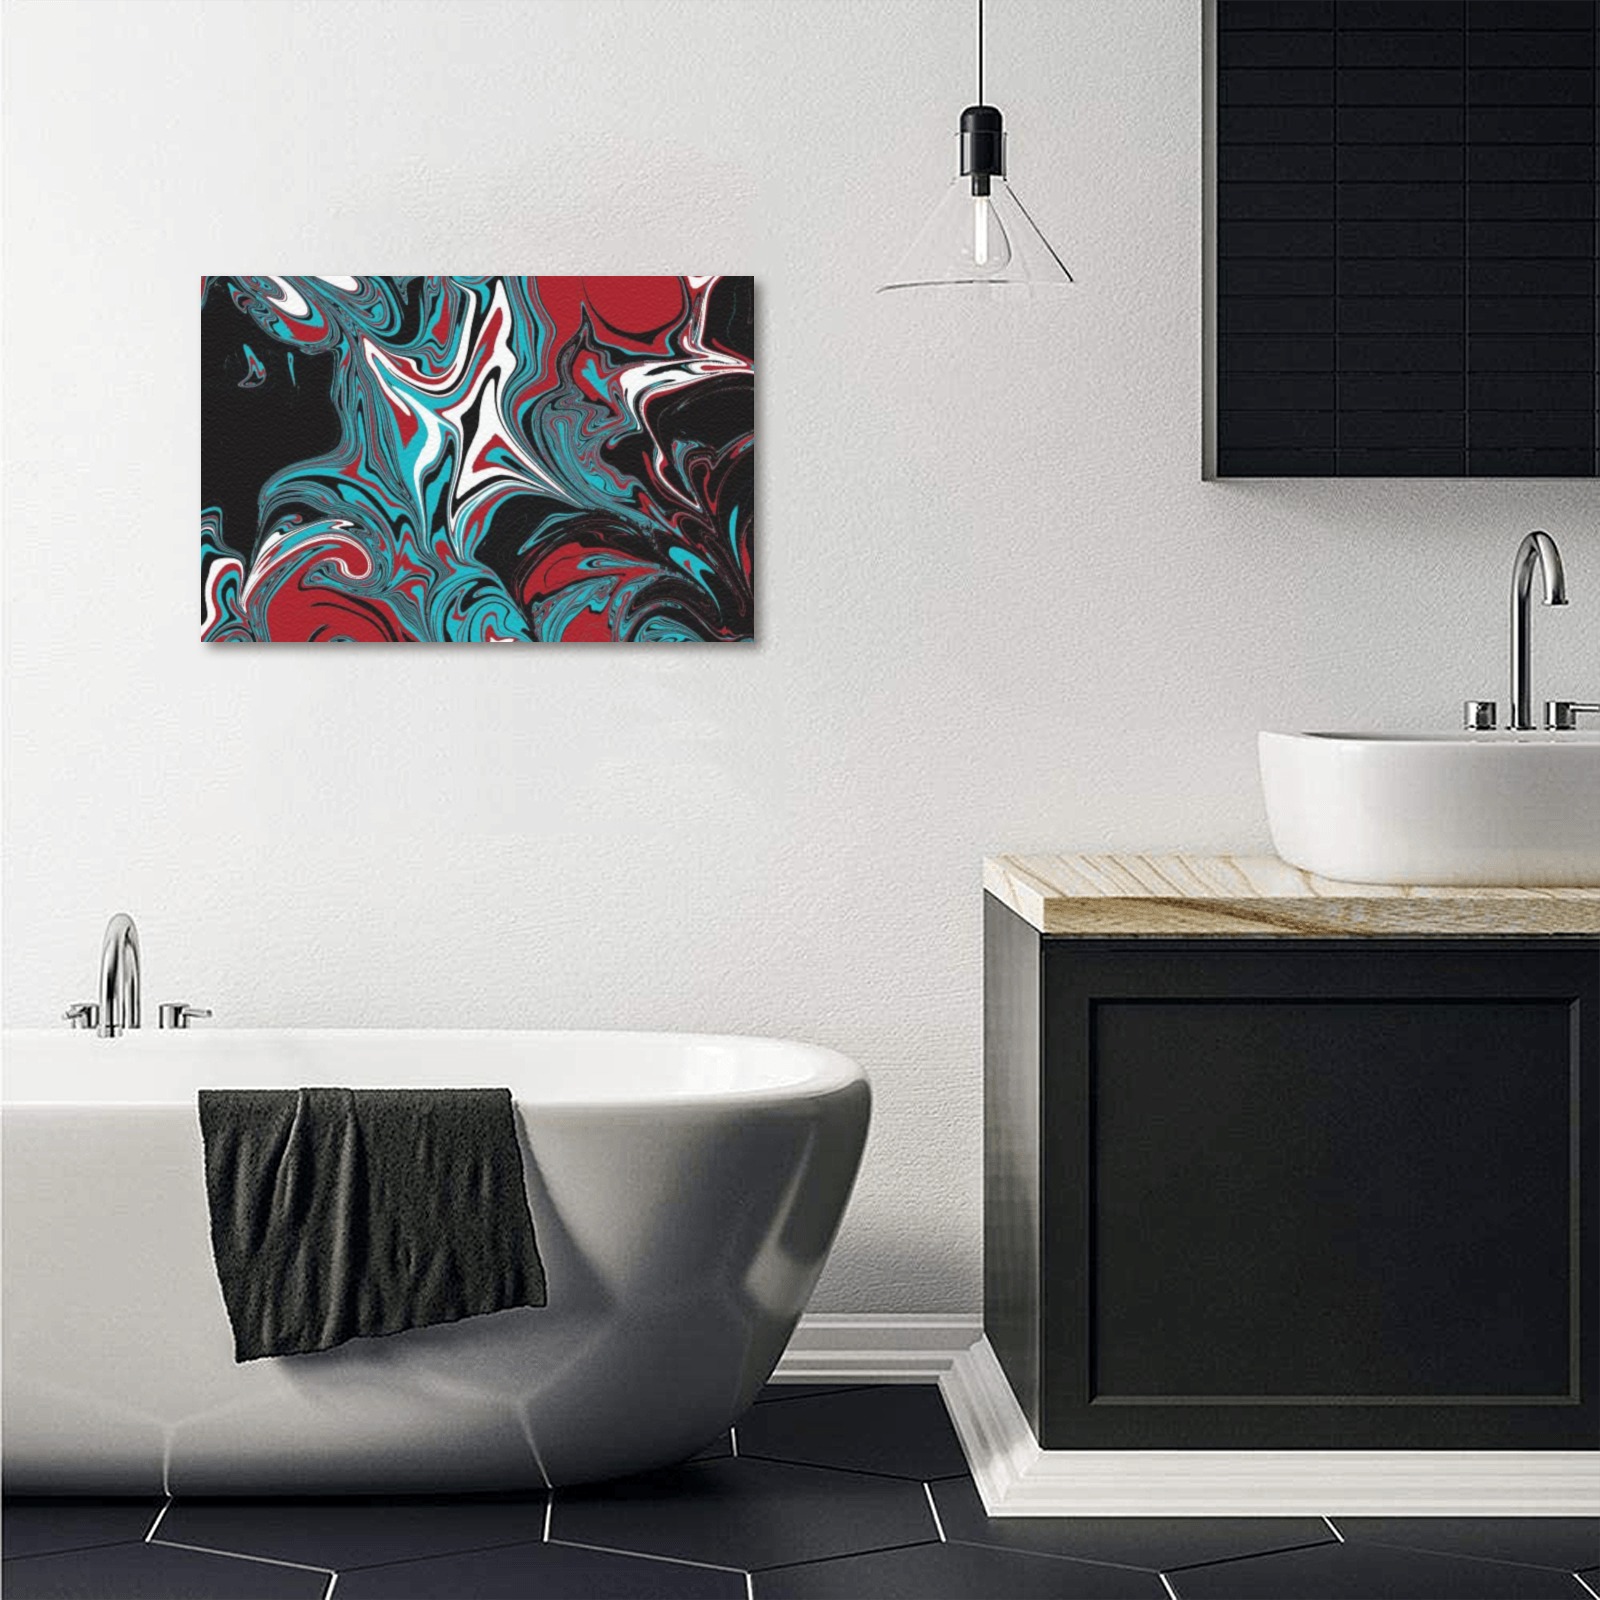 Dark Wave of Colors Upgraded Canvas Print 18"x12"